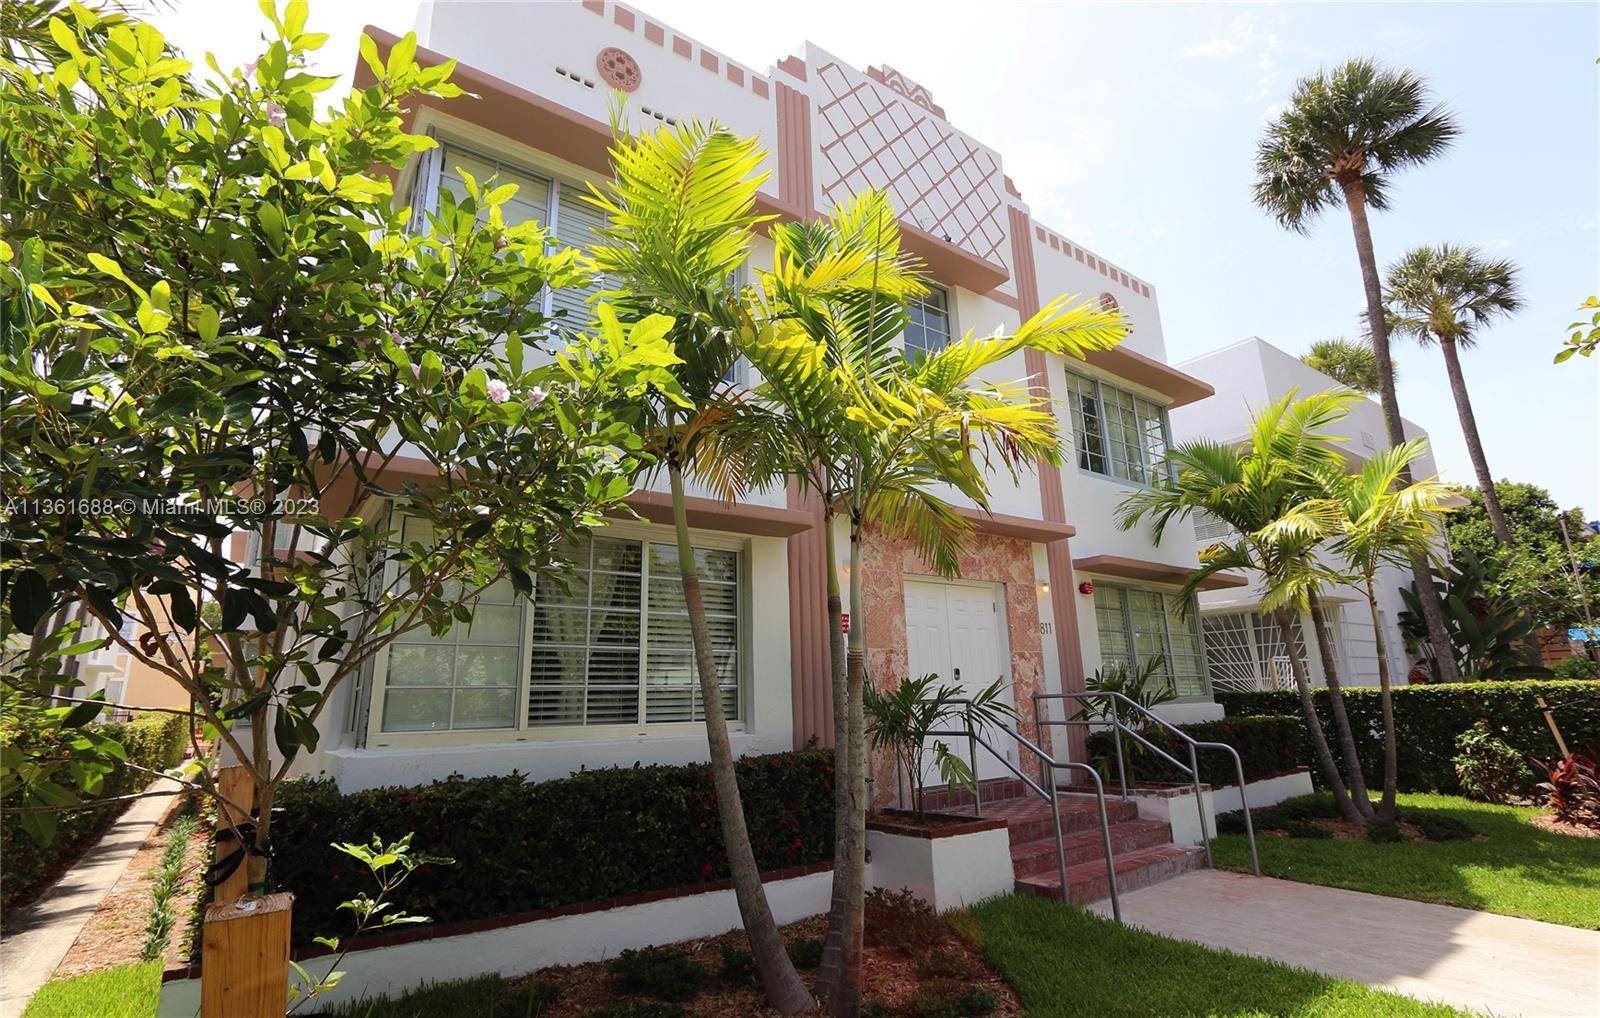 Beautiful Bright apartment in the heart of south beach great for investment.